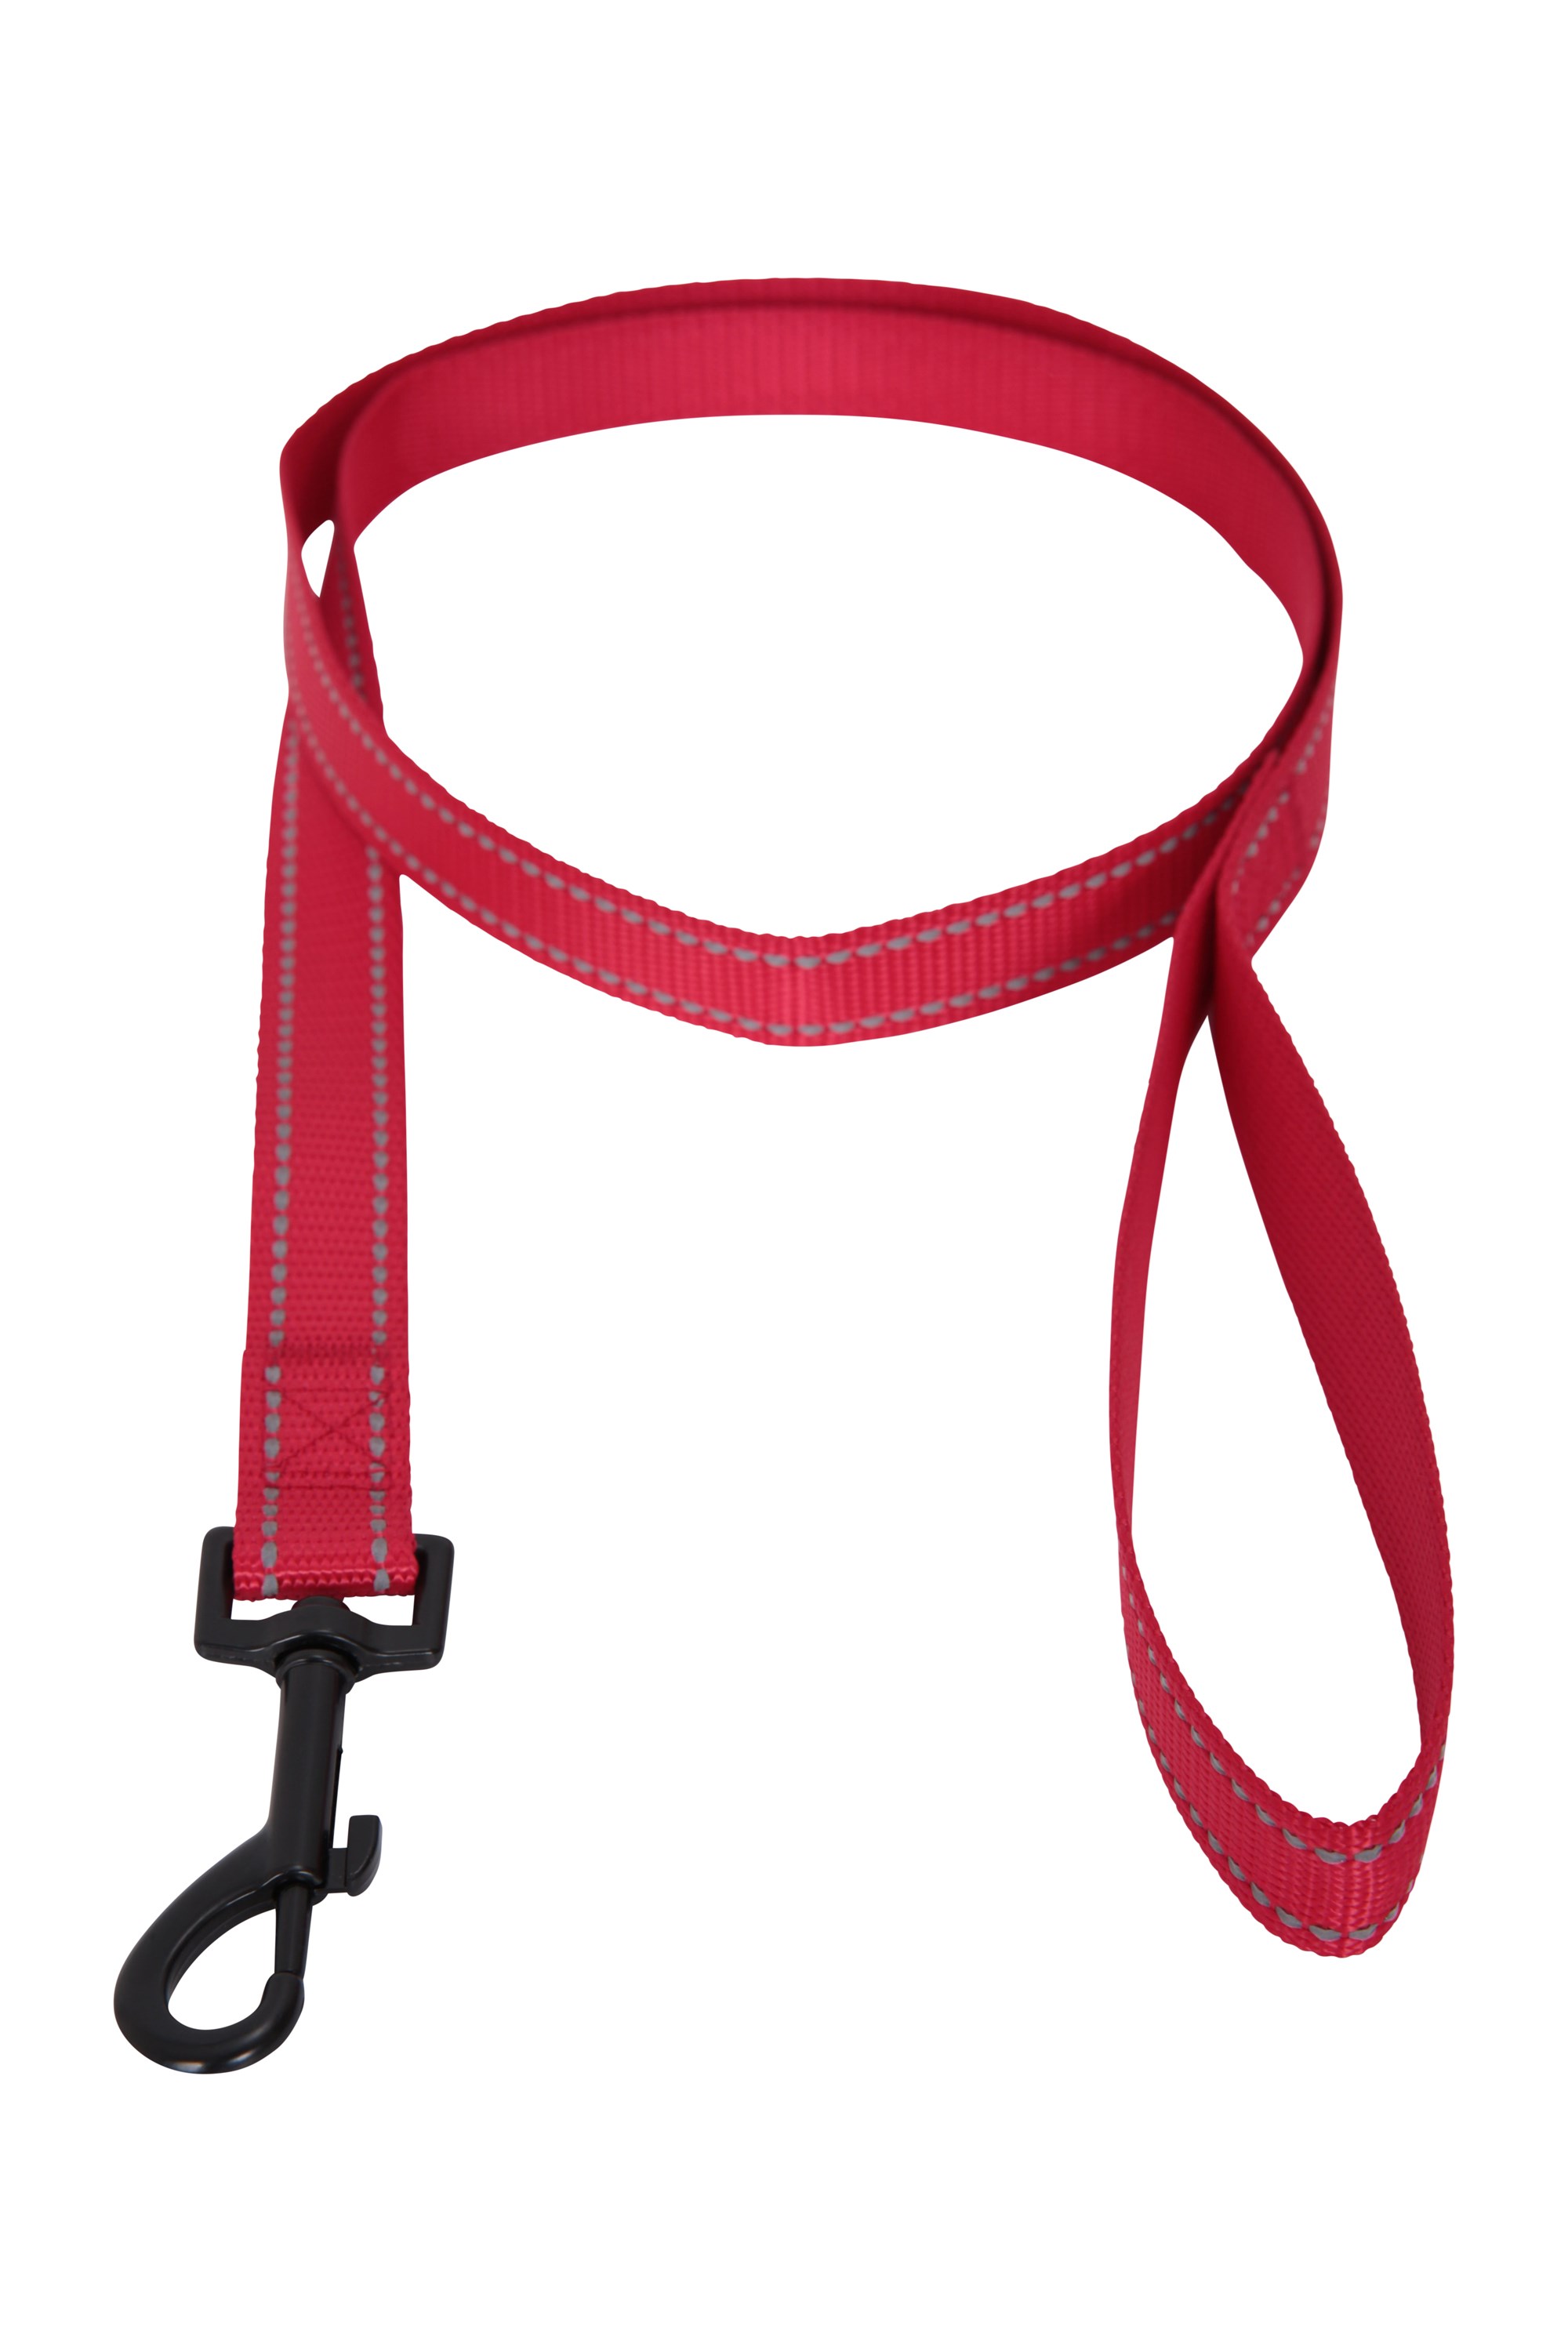 Mountain Warehouse Dog Reflective Lead 120cm Red